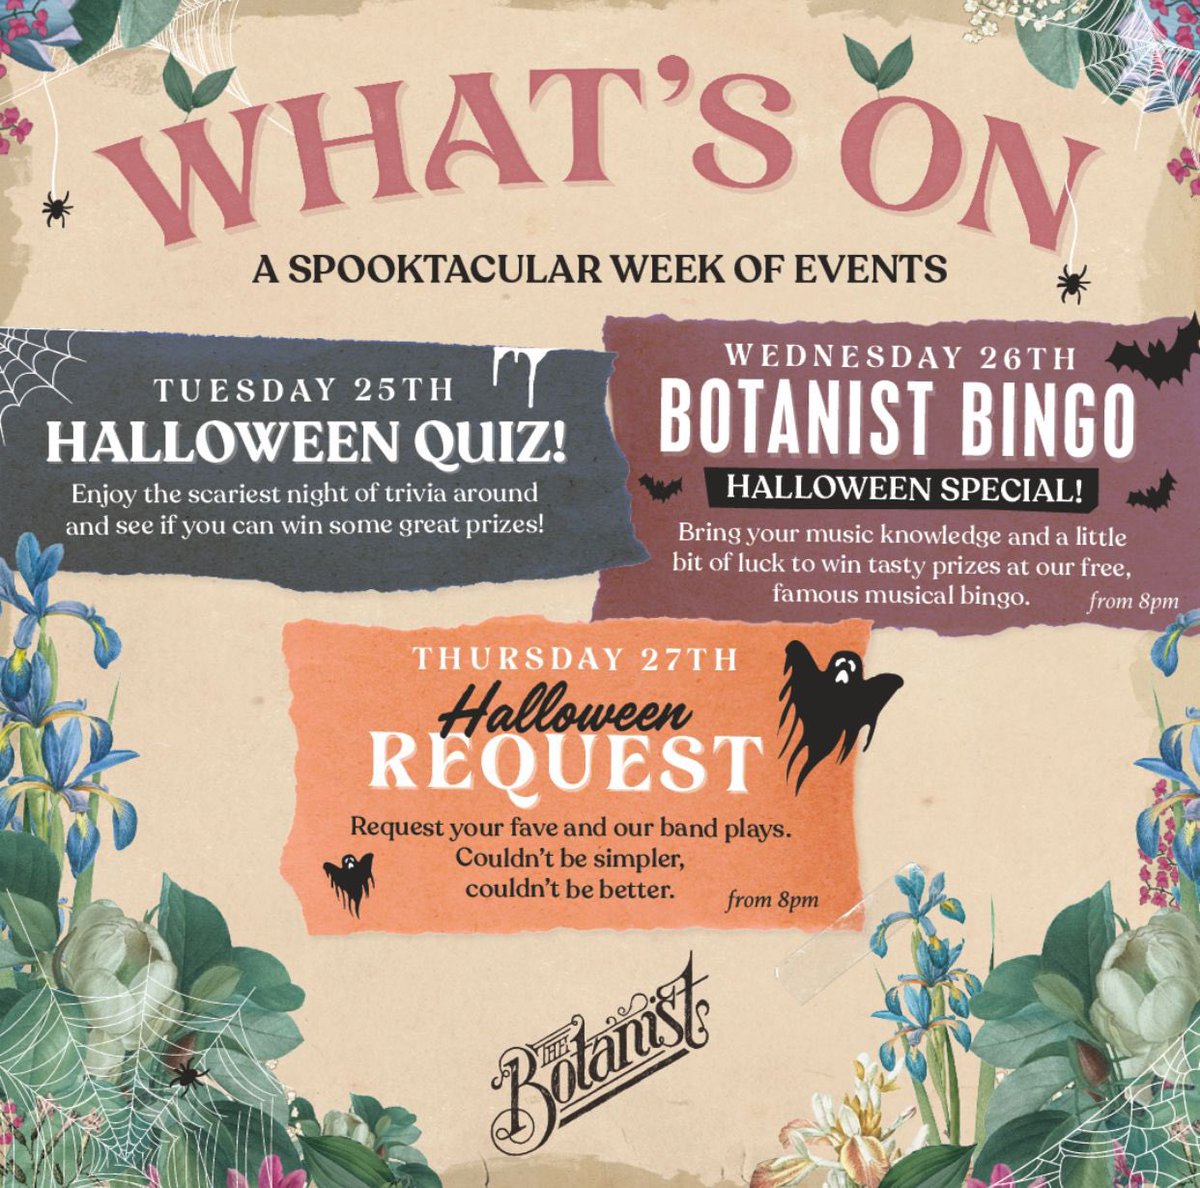 Orange you glad it’s Halloween week? 🎃💀 Get ready for a week of SPOOKTACULAR events at the Botanist! Including the Halloween quiz, Botanist Bingo Halloween Special & Halloween Request Night! Book in via this link: thebotanist.uk.com/book-online Fancy dress is welcome! 🧟‍♀️